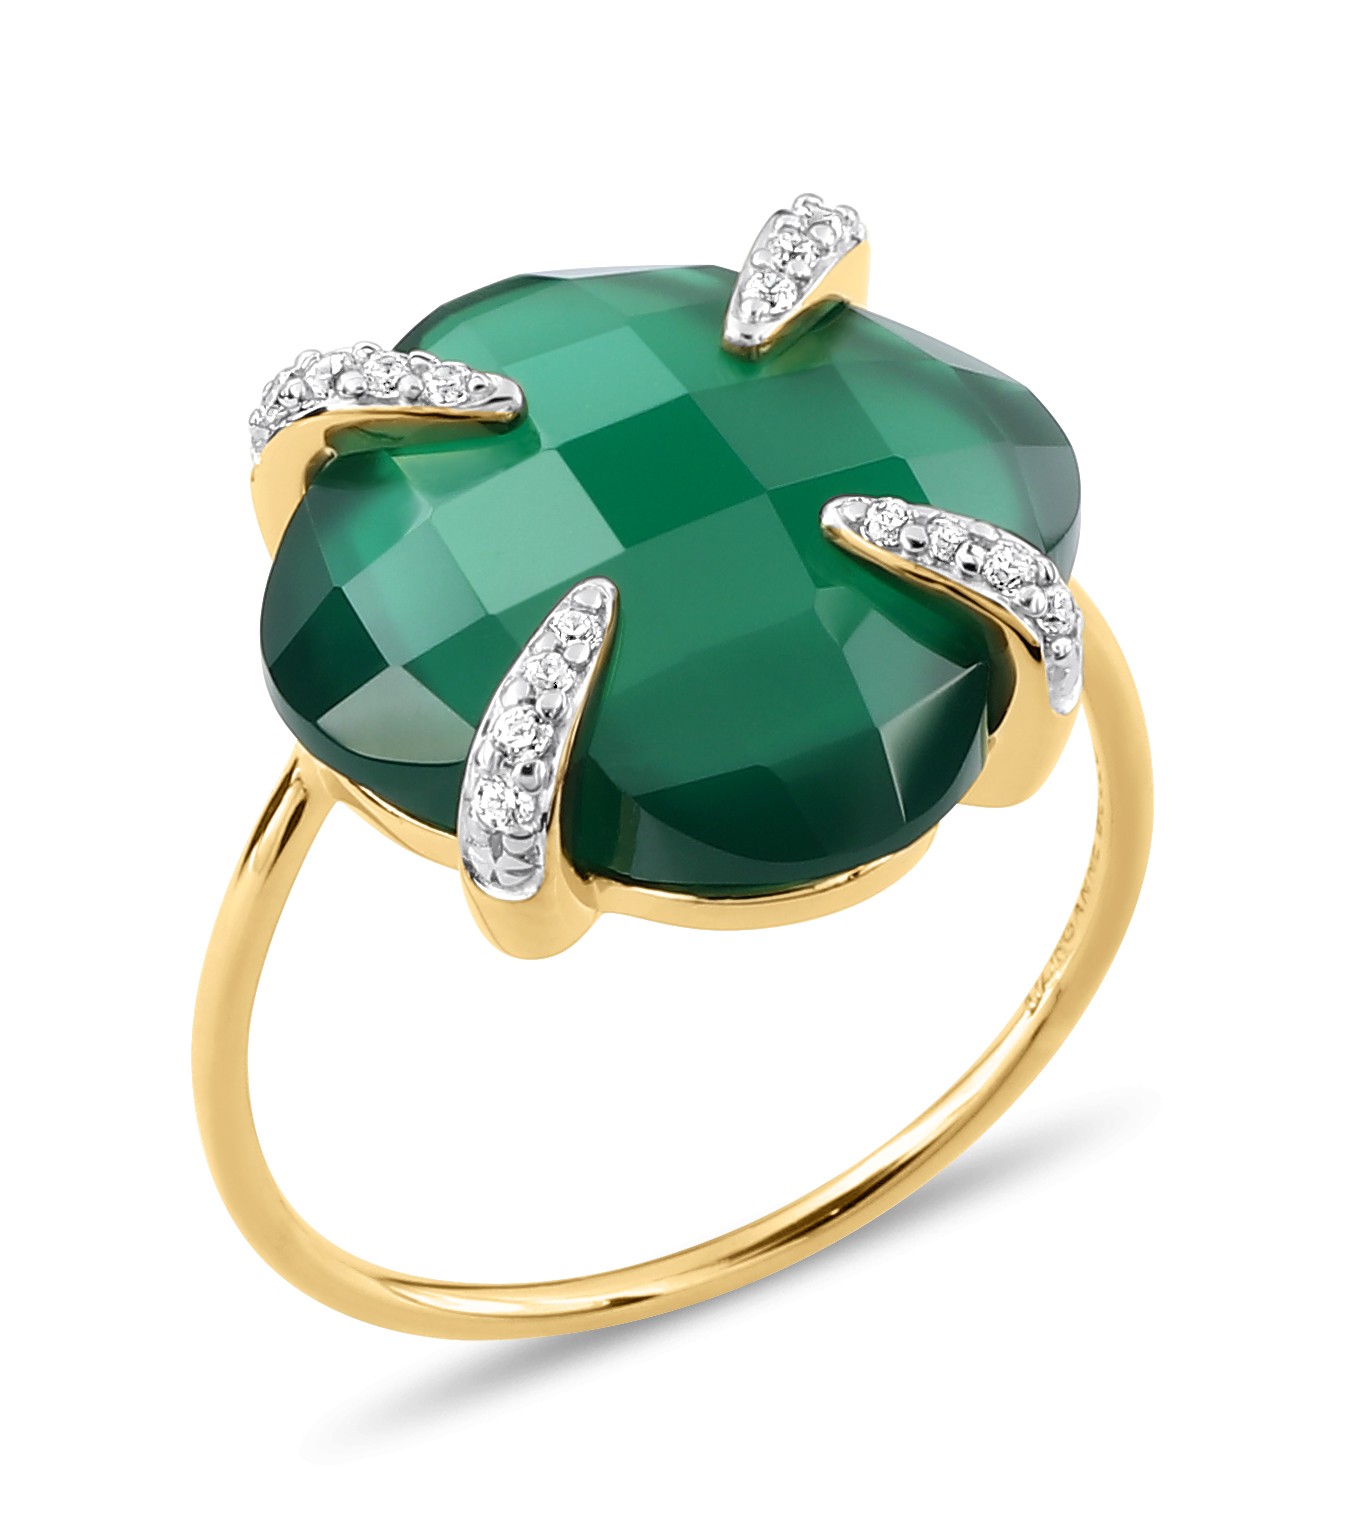 22K Gold Ring For Women with Cz & Green Stone - 235-GR7873 in 3.050 Grams